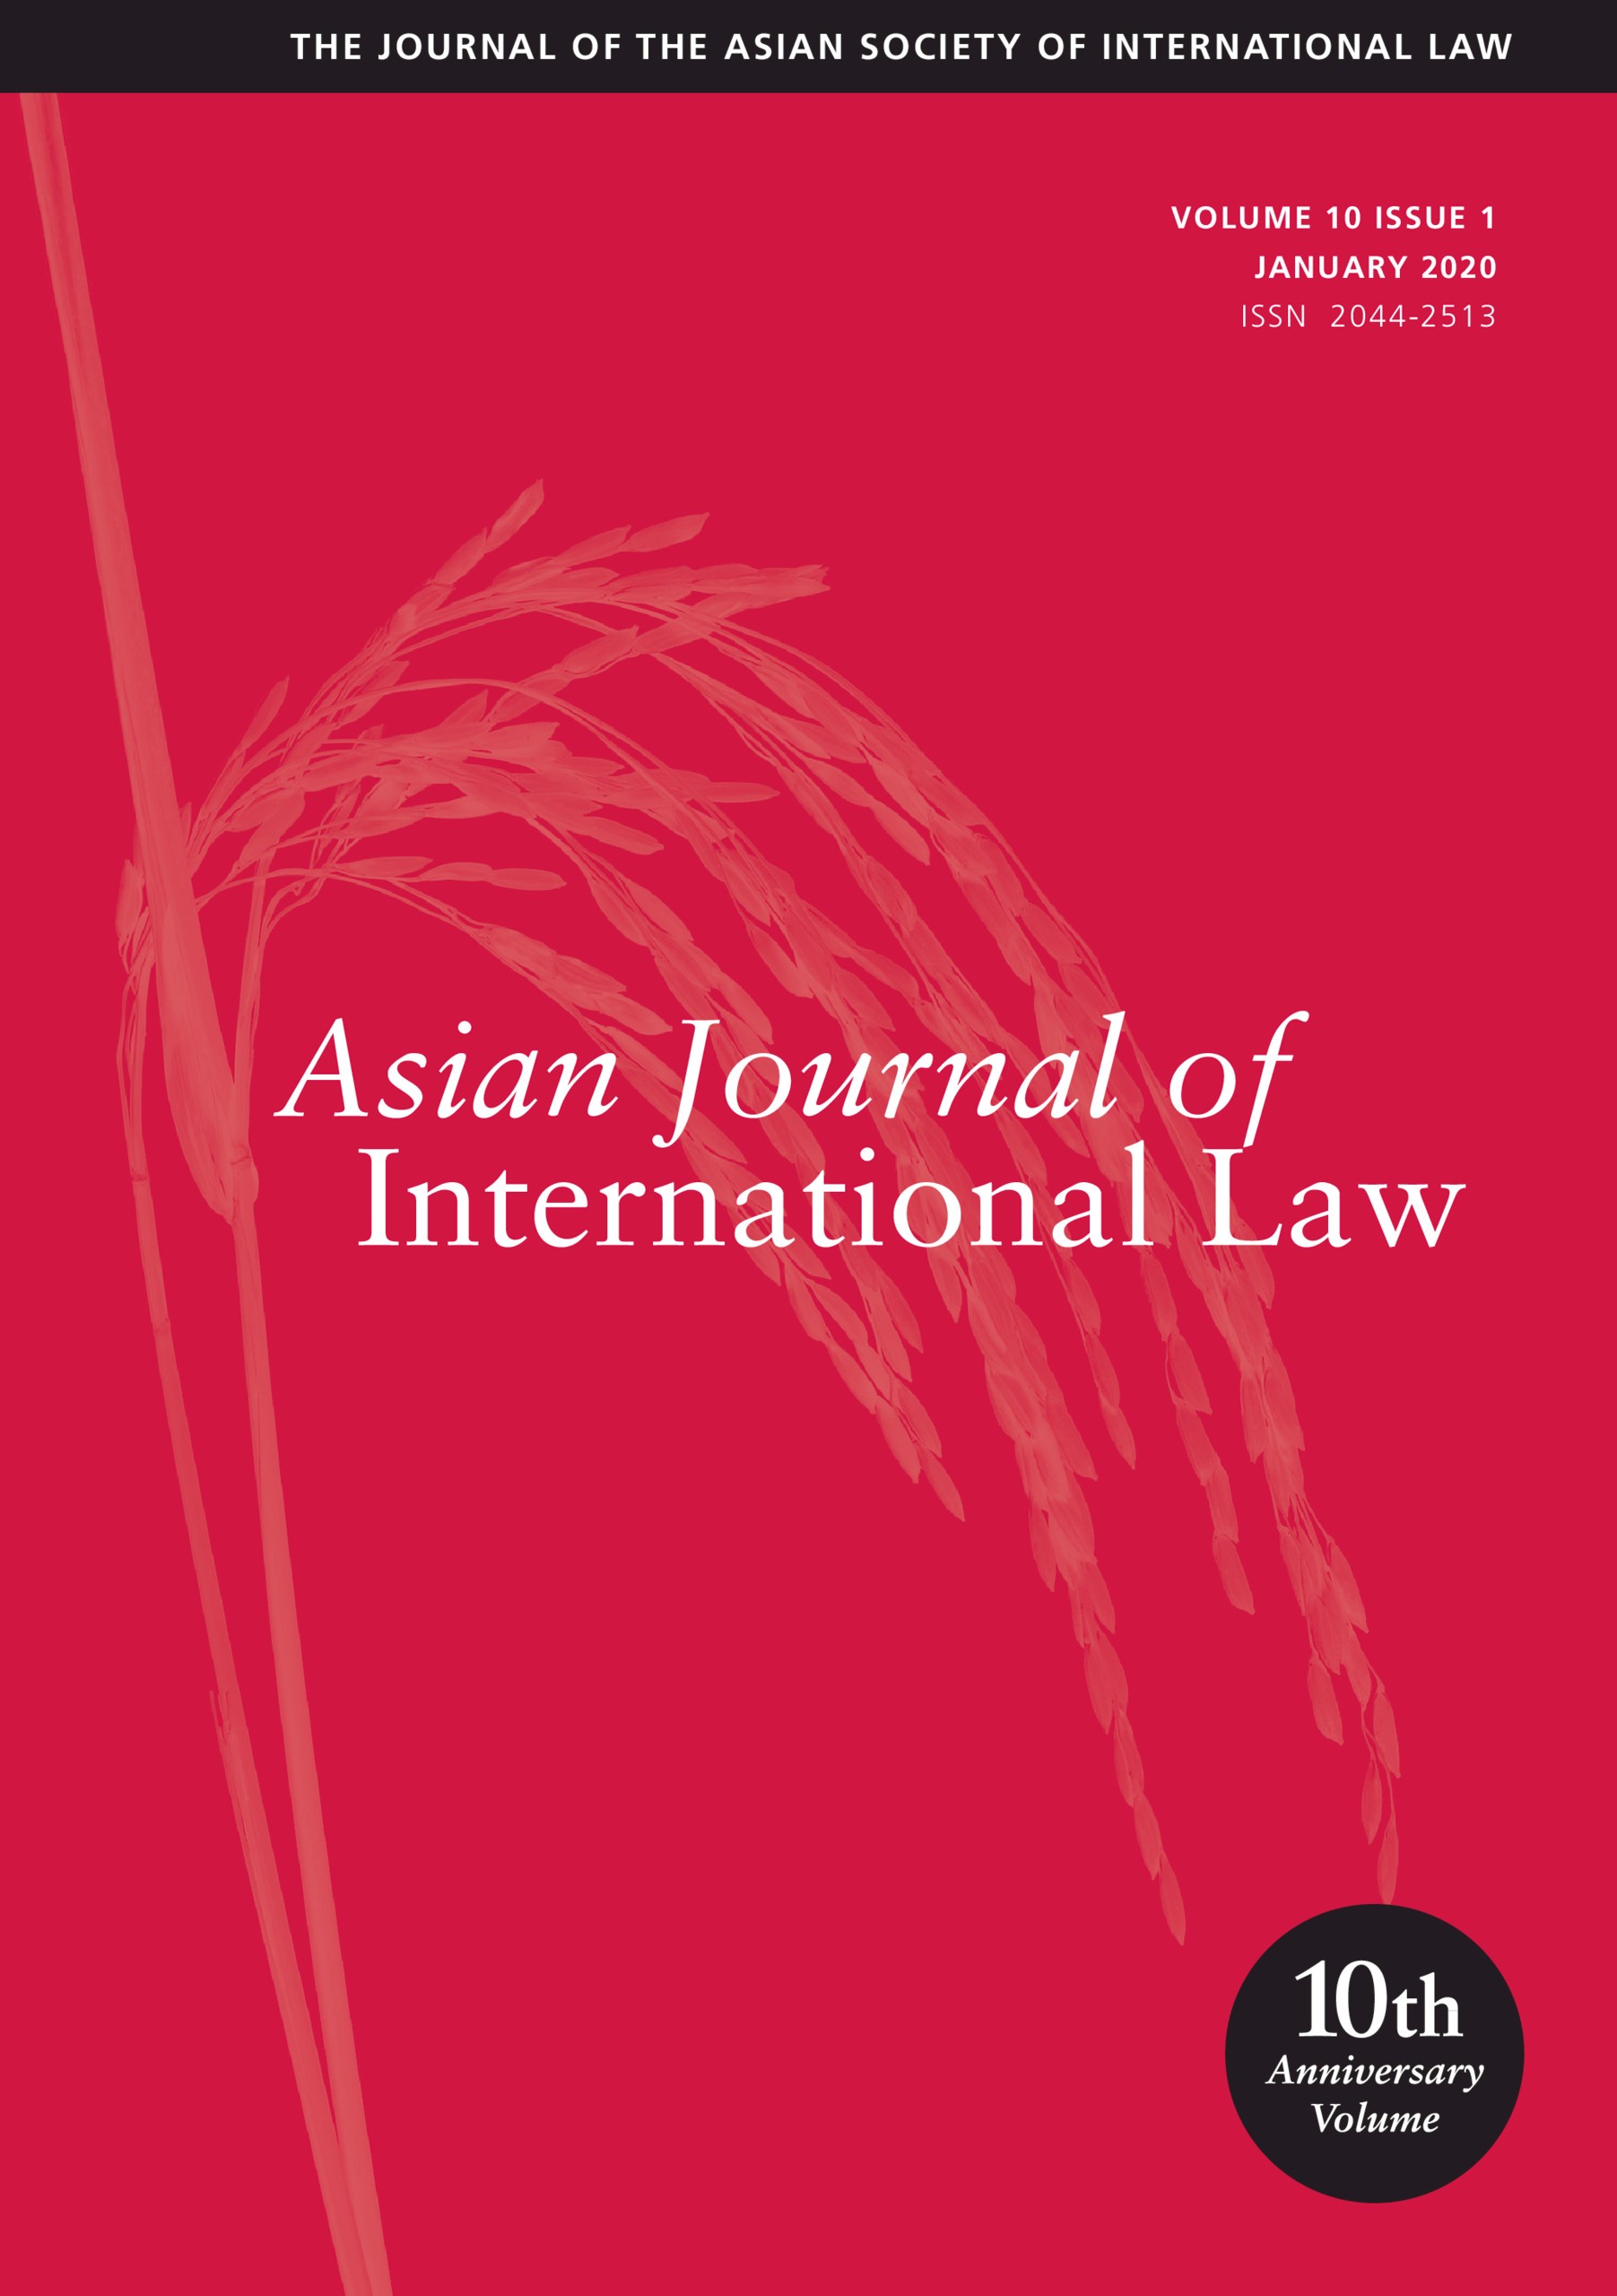 journal of legal education